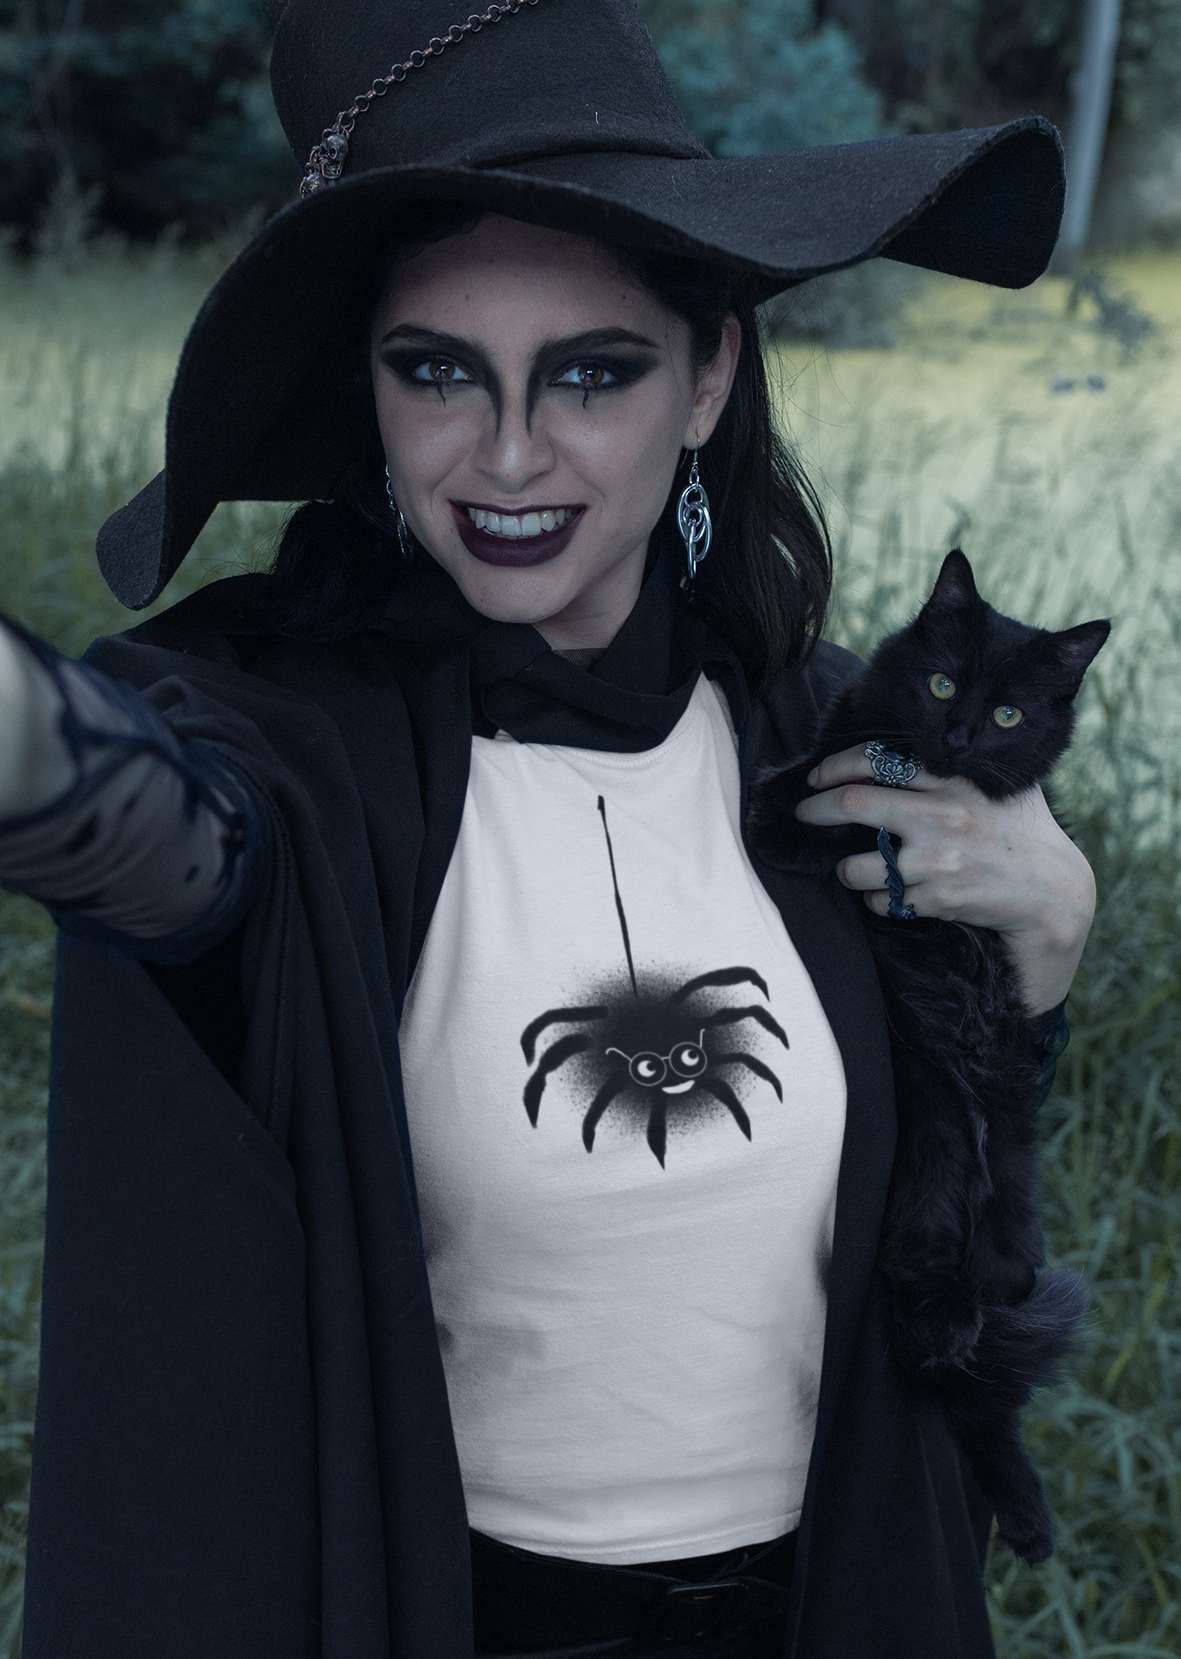 Spider T-shirt - A young woman dressed as a witch for Halloween wearing a cute Spencer Spider original illustrated design on a Hector and Bone quality vegan cotton t-shirt